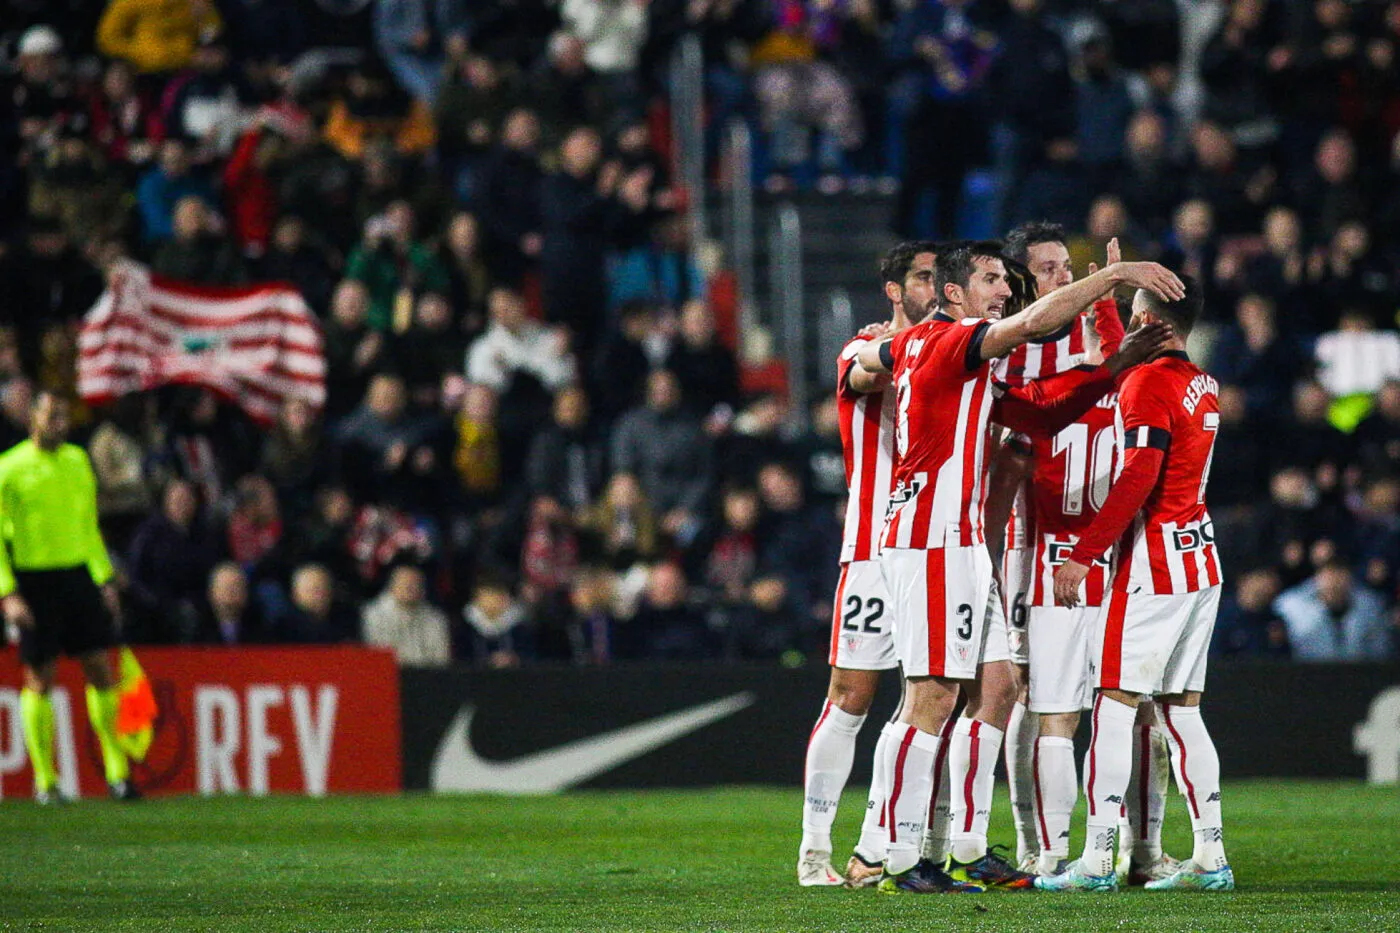 Players of Athletic Bilbao during the Copa del Rey match between Eldense and Athletic Bilbao on January 5th, 2023.